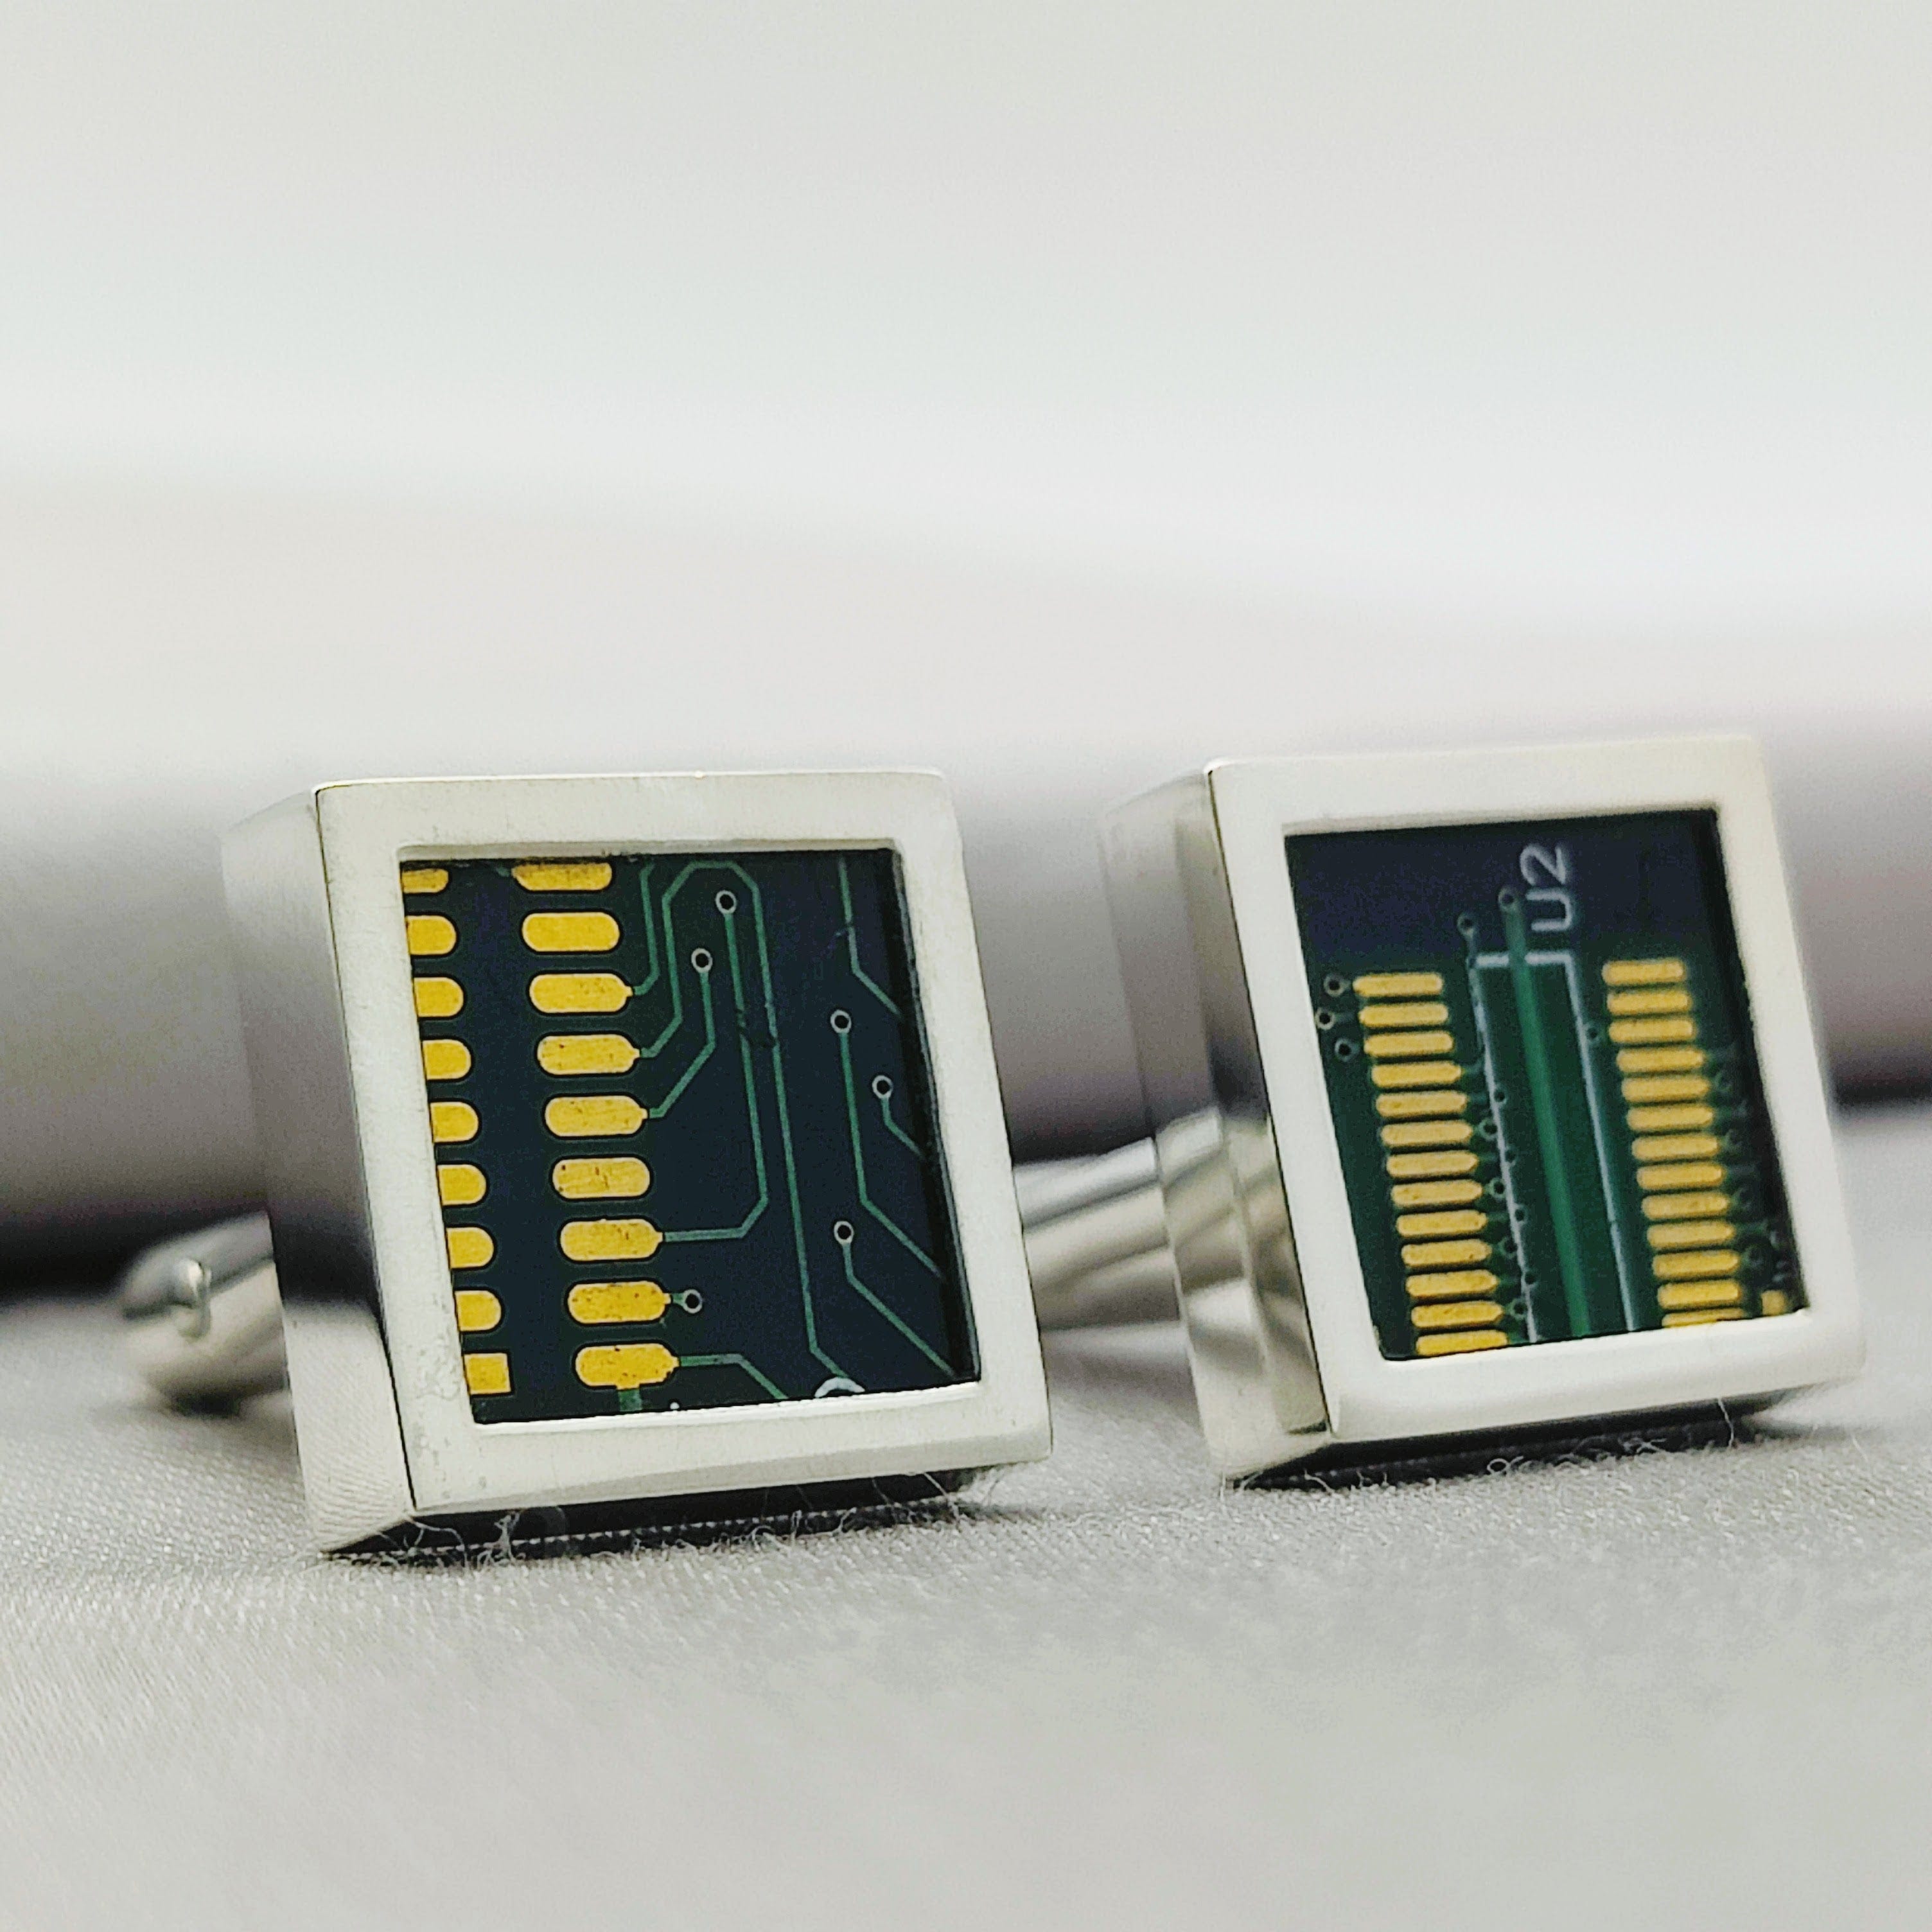 Hepburn and Hughes Computer Circuit Board Cufflinks | Sterling Silver Cuff Links